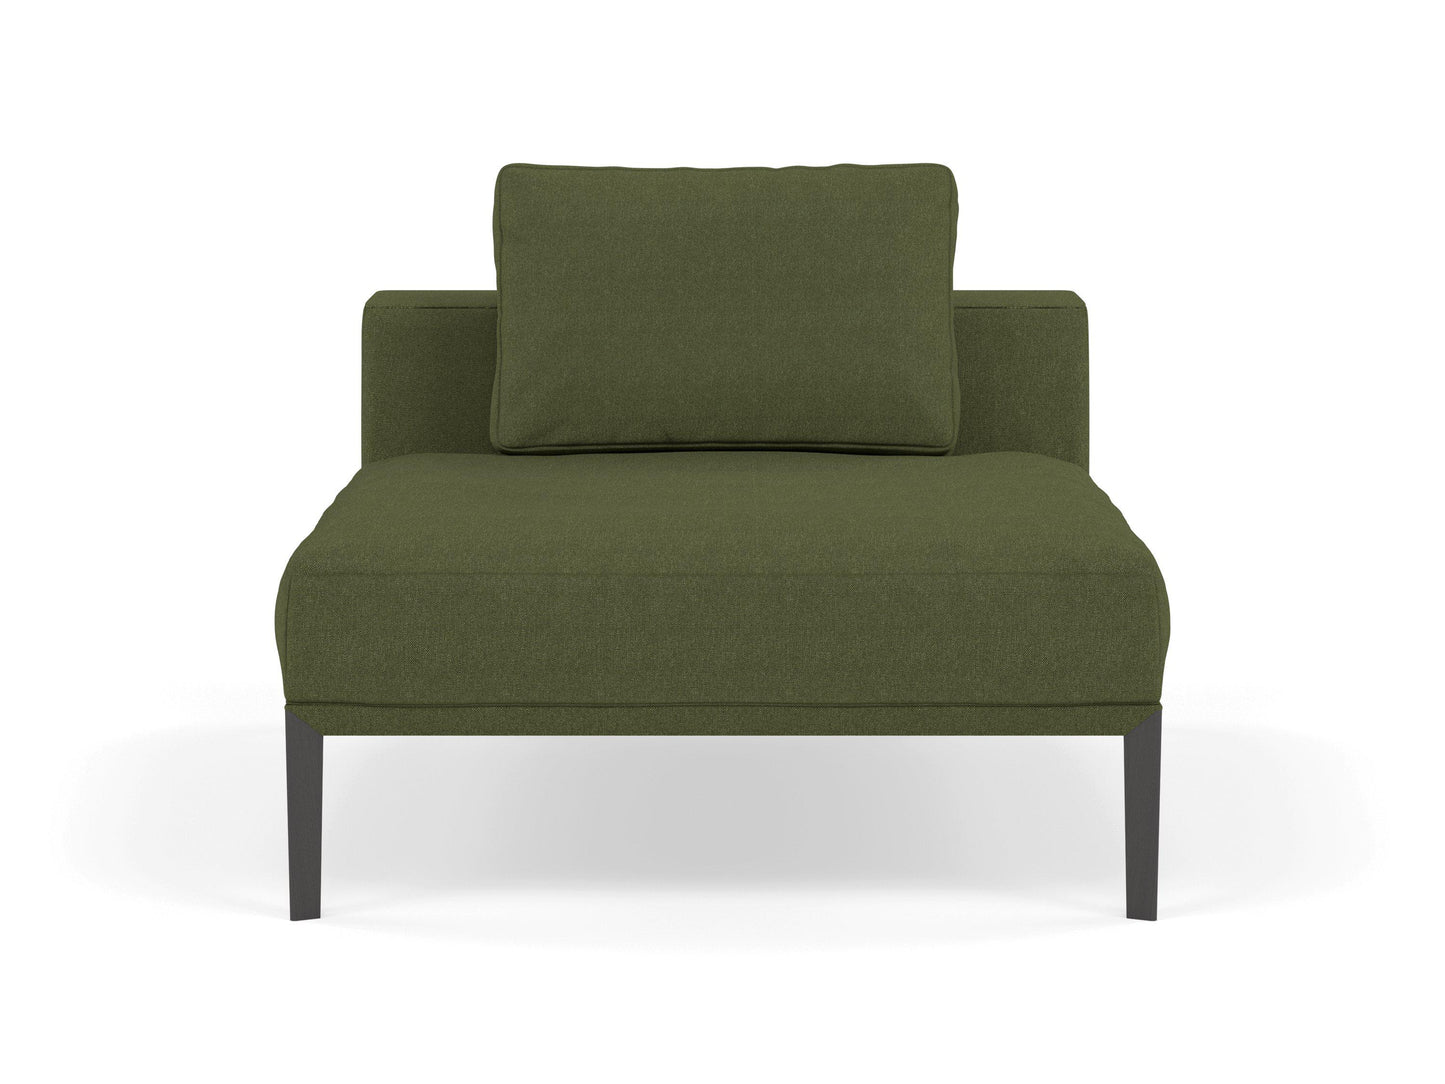 Modern Armchair 1 Seater Sofa without armrests in Seaweed Green Fabric-Wenge Oak-Distinct Designs (London) Ltd